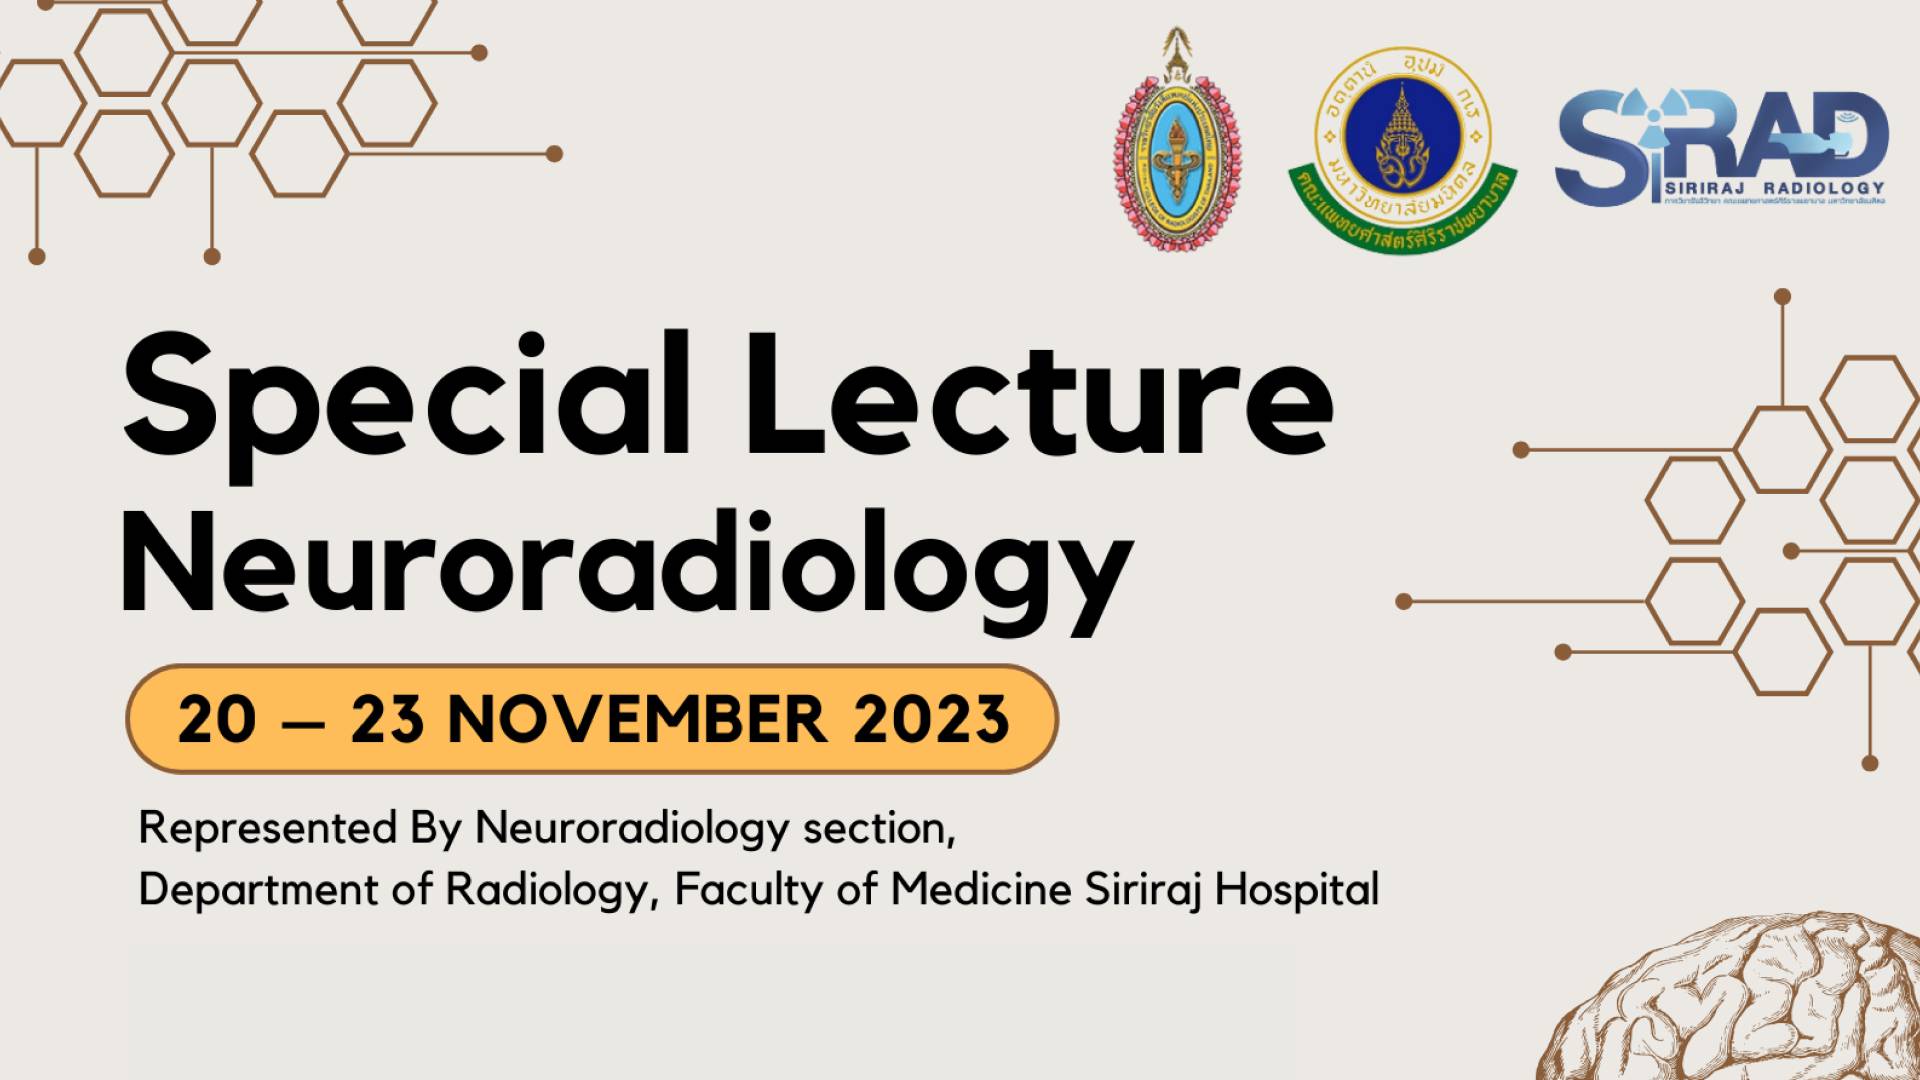 Exciting Neuroradiology Lecture Series Alert!